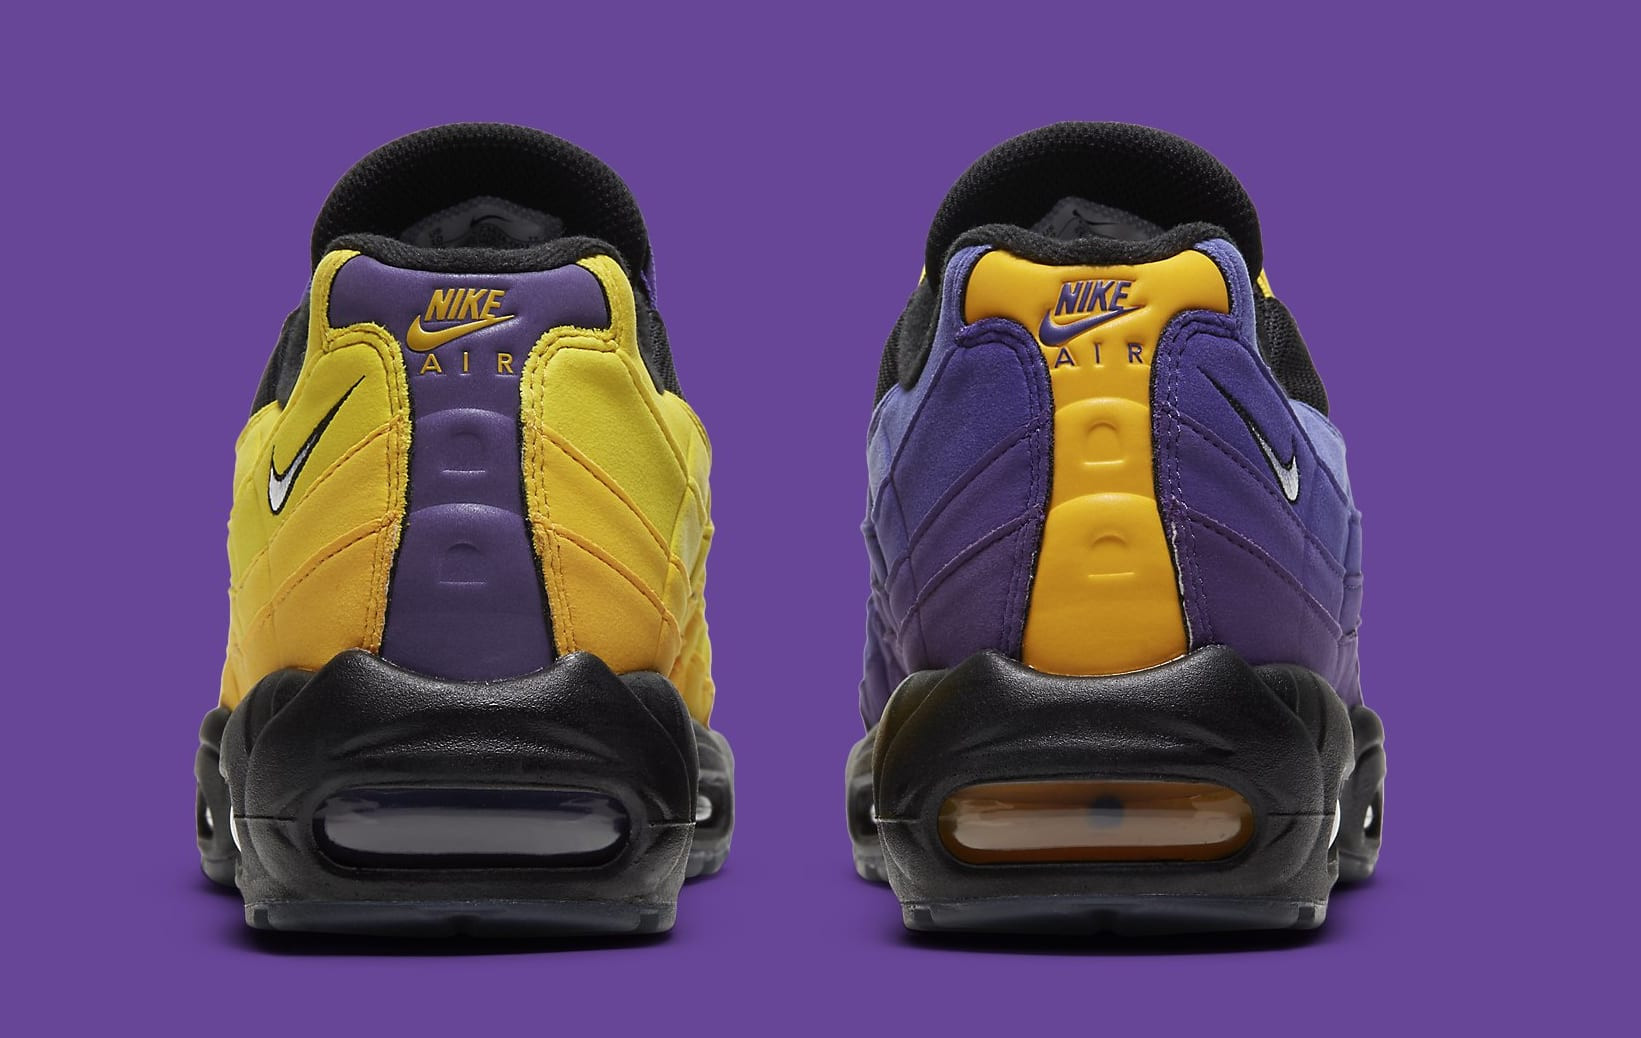 Nike Air Max 95 LeBron “Lakers” Gets New Release Date